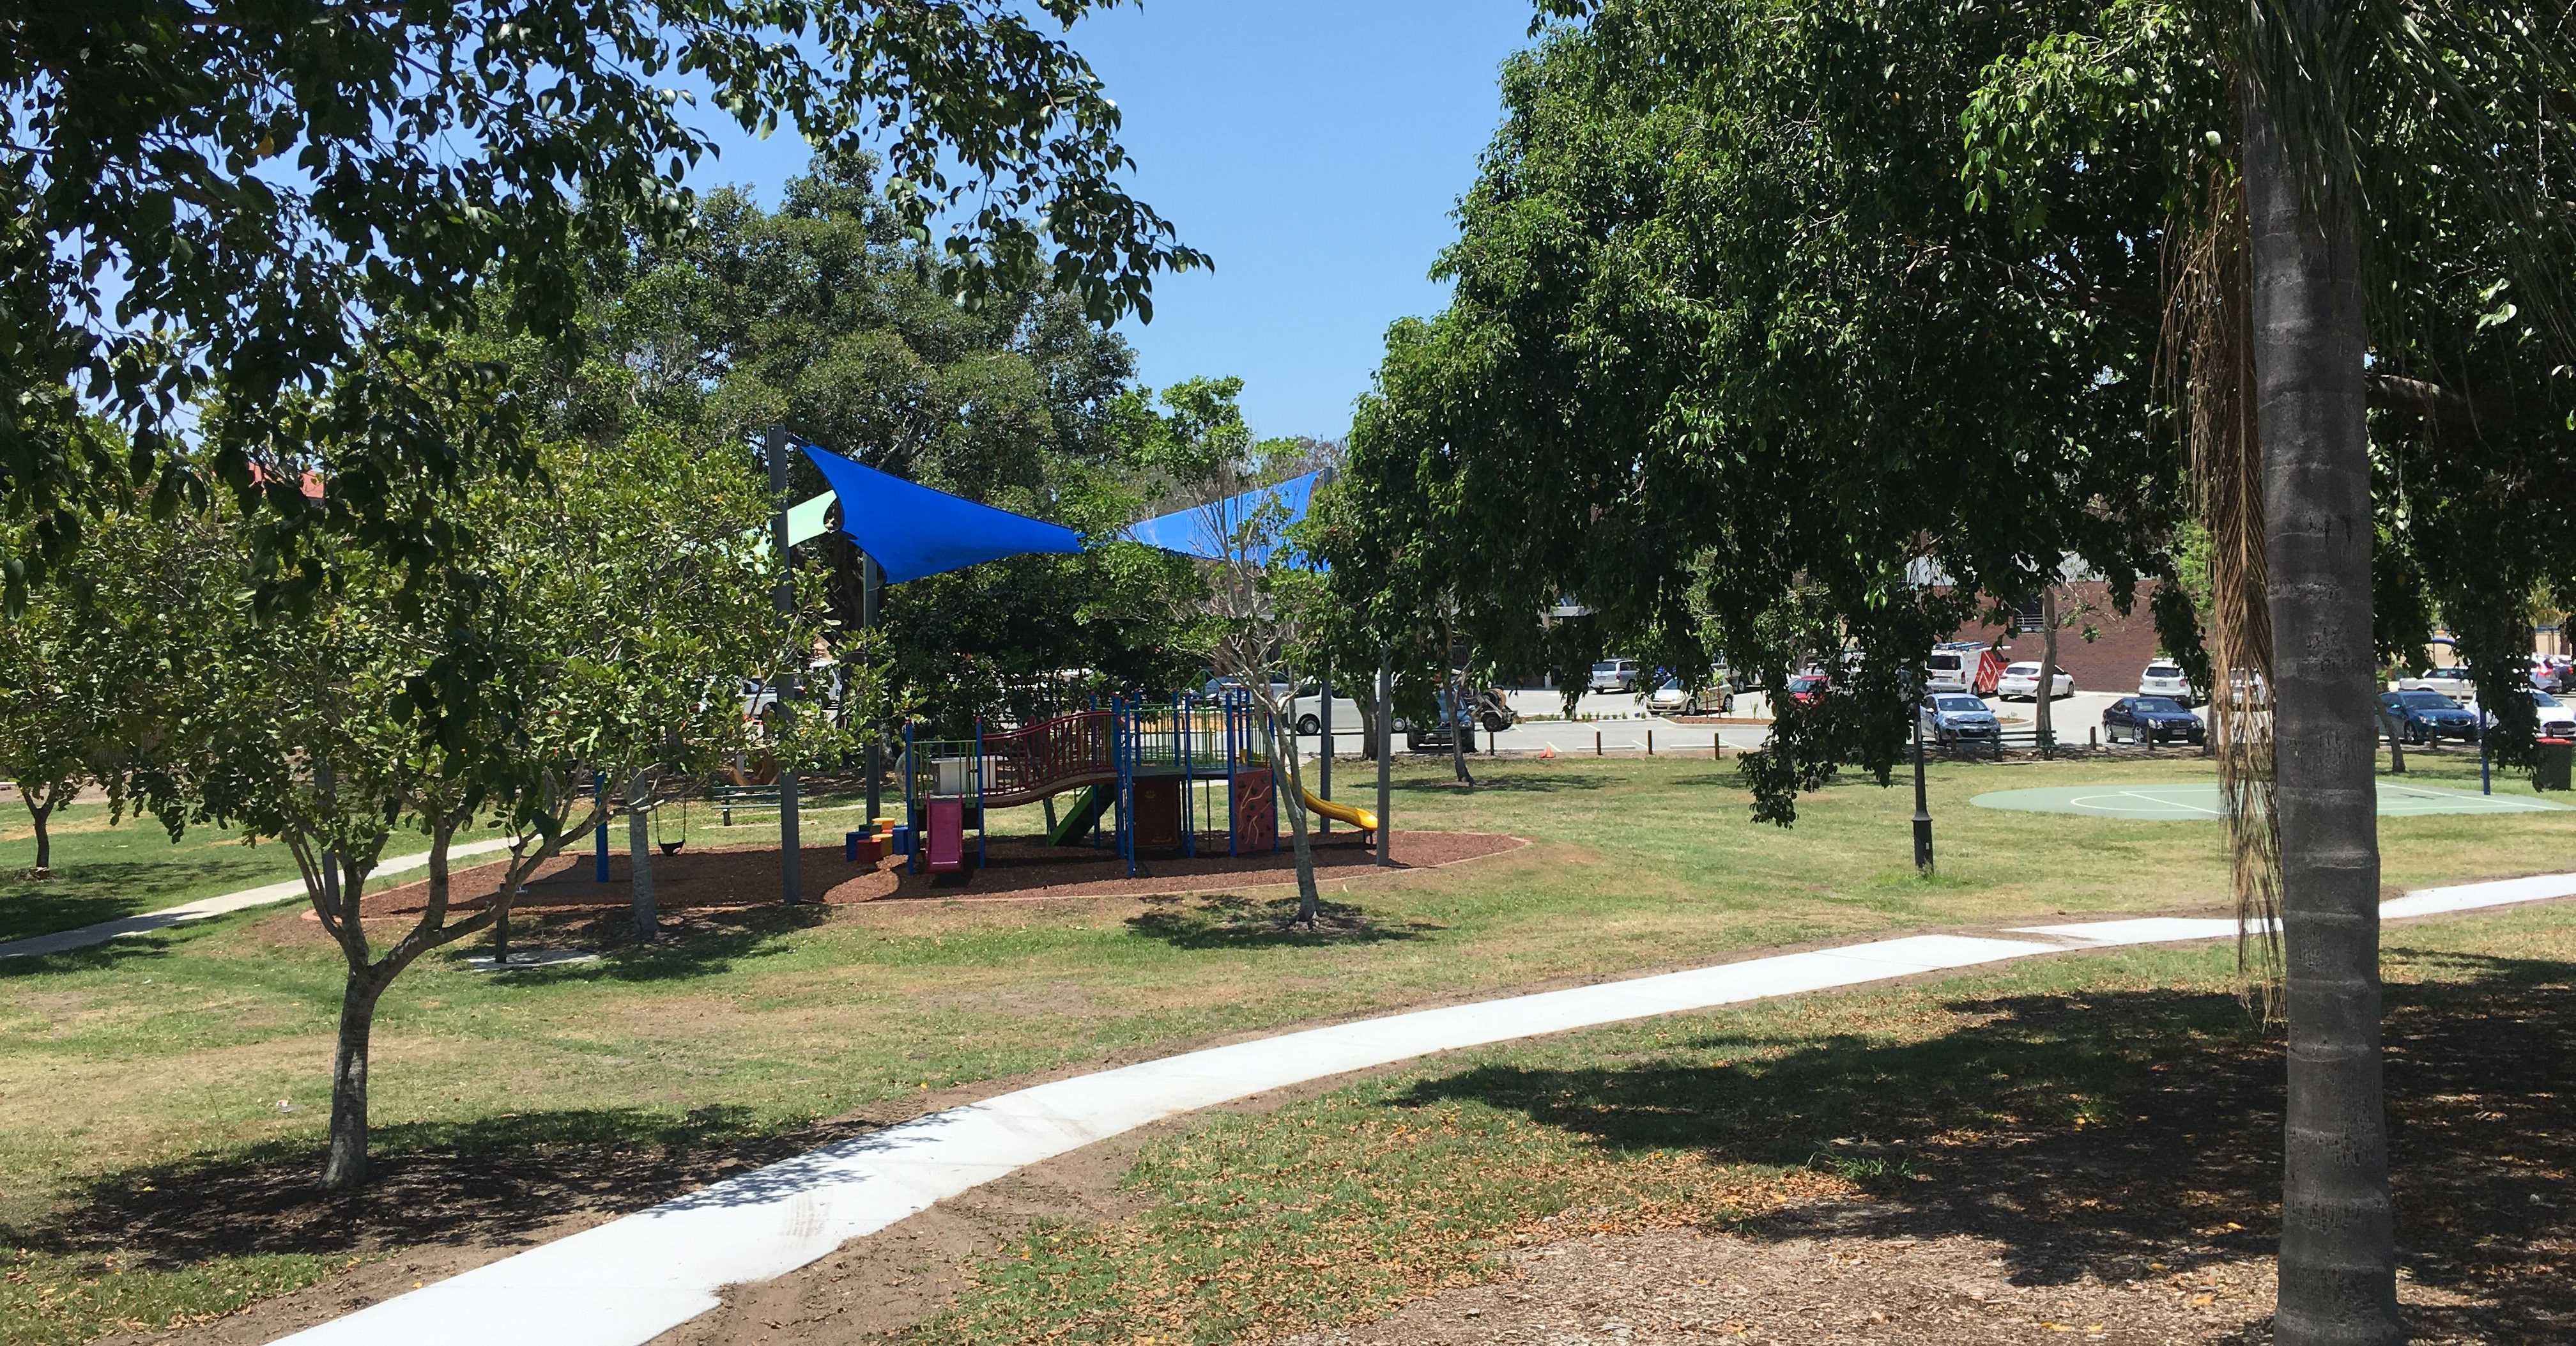 Toowong Park is just across the road. Photo taken by Property Mash 30/11/2016.